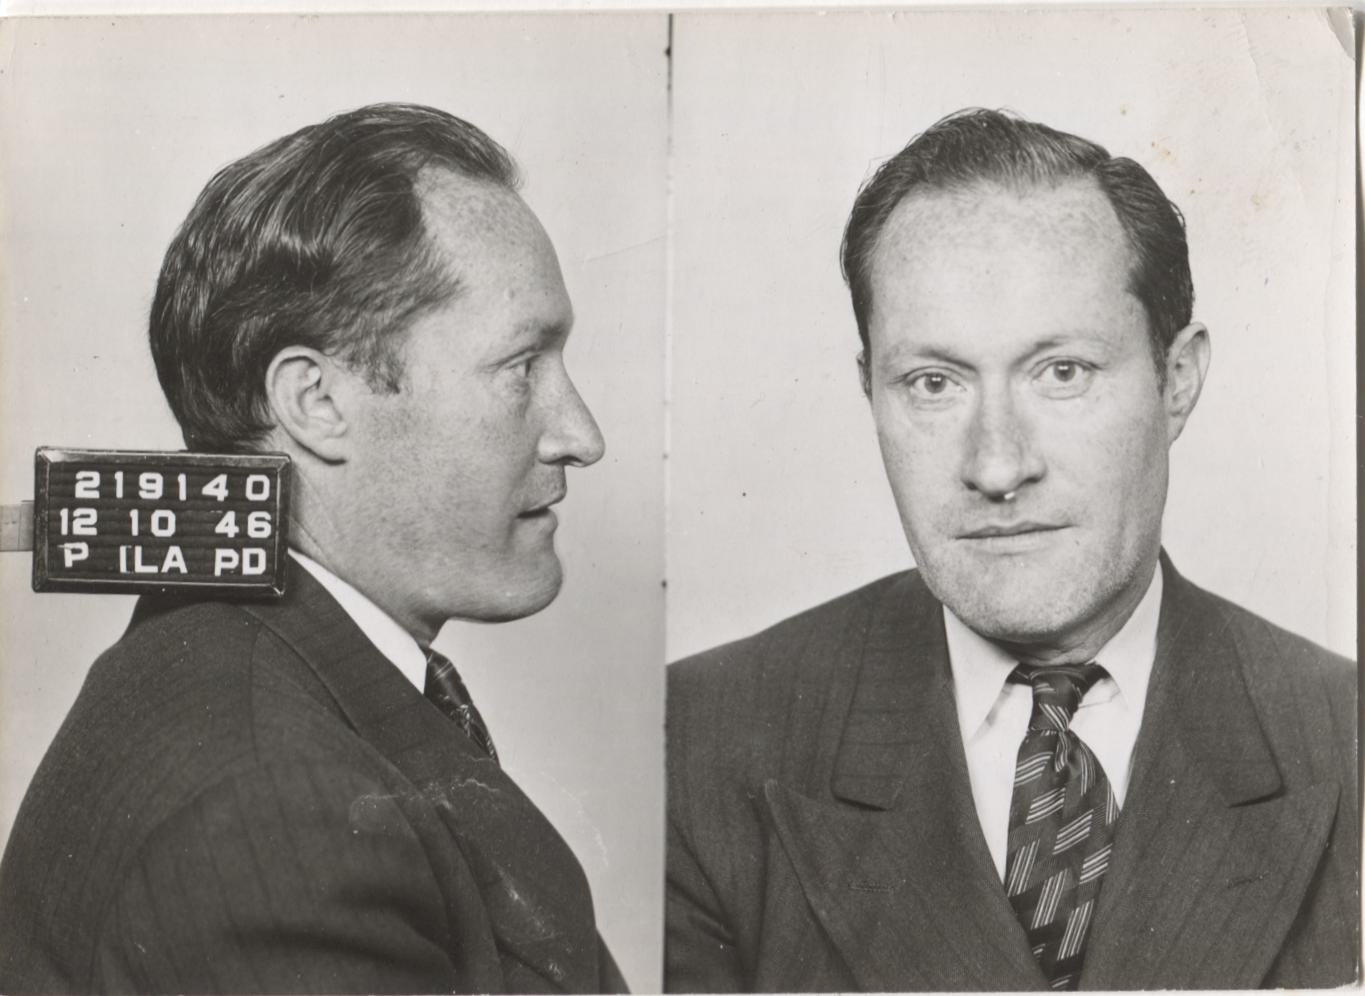 John P. Connelly Mugshot - Arrested on 12/10/1946 for Poolselling & Bookmaking